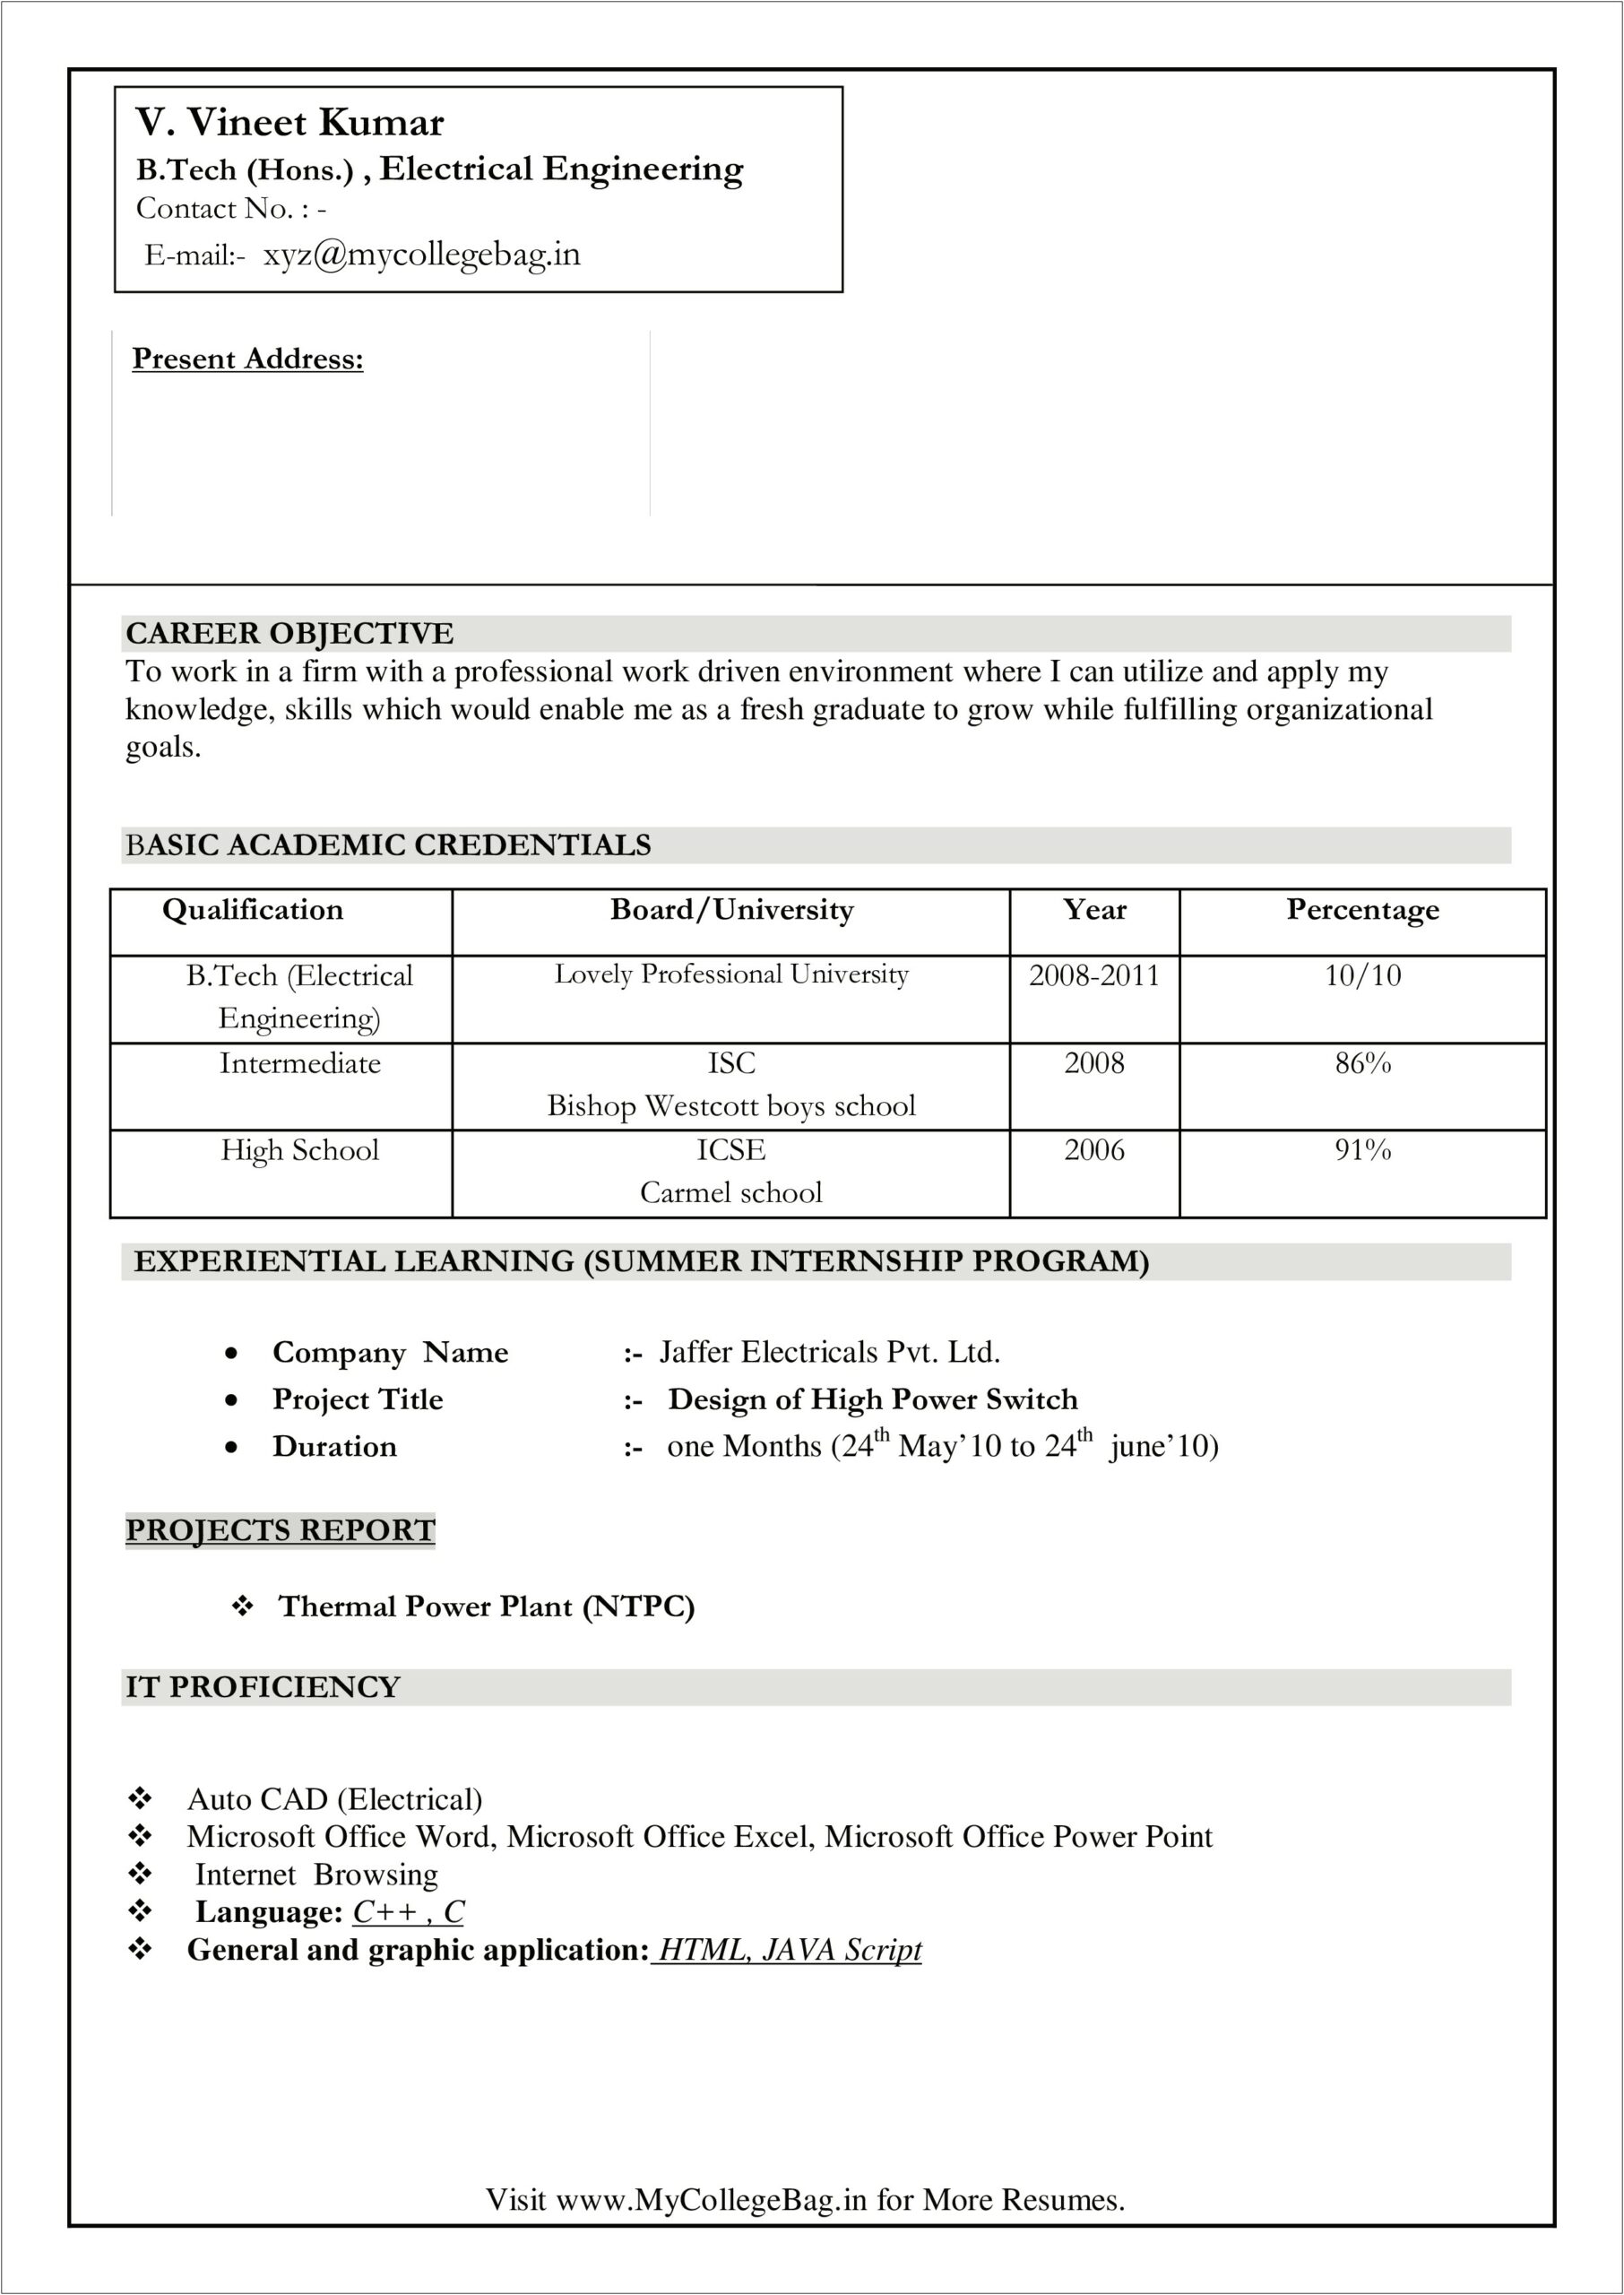 Resume For Electrical Engineer With Experience Pdf